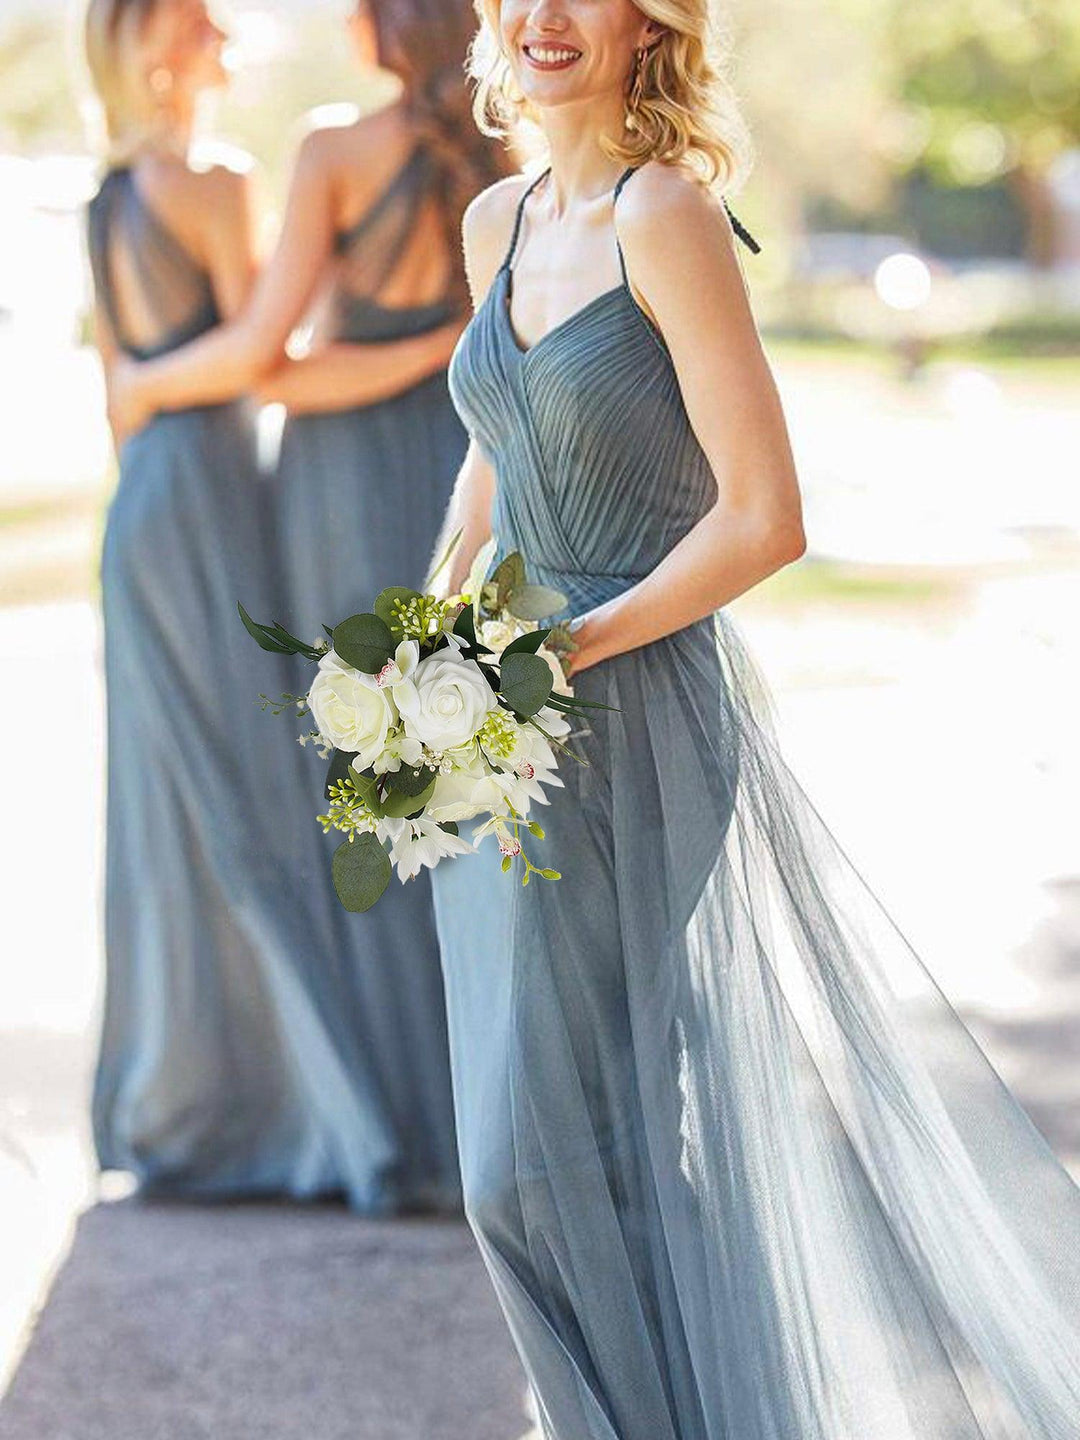 How to Match Bridesmaid Flowers with Your Wedding Theme?